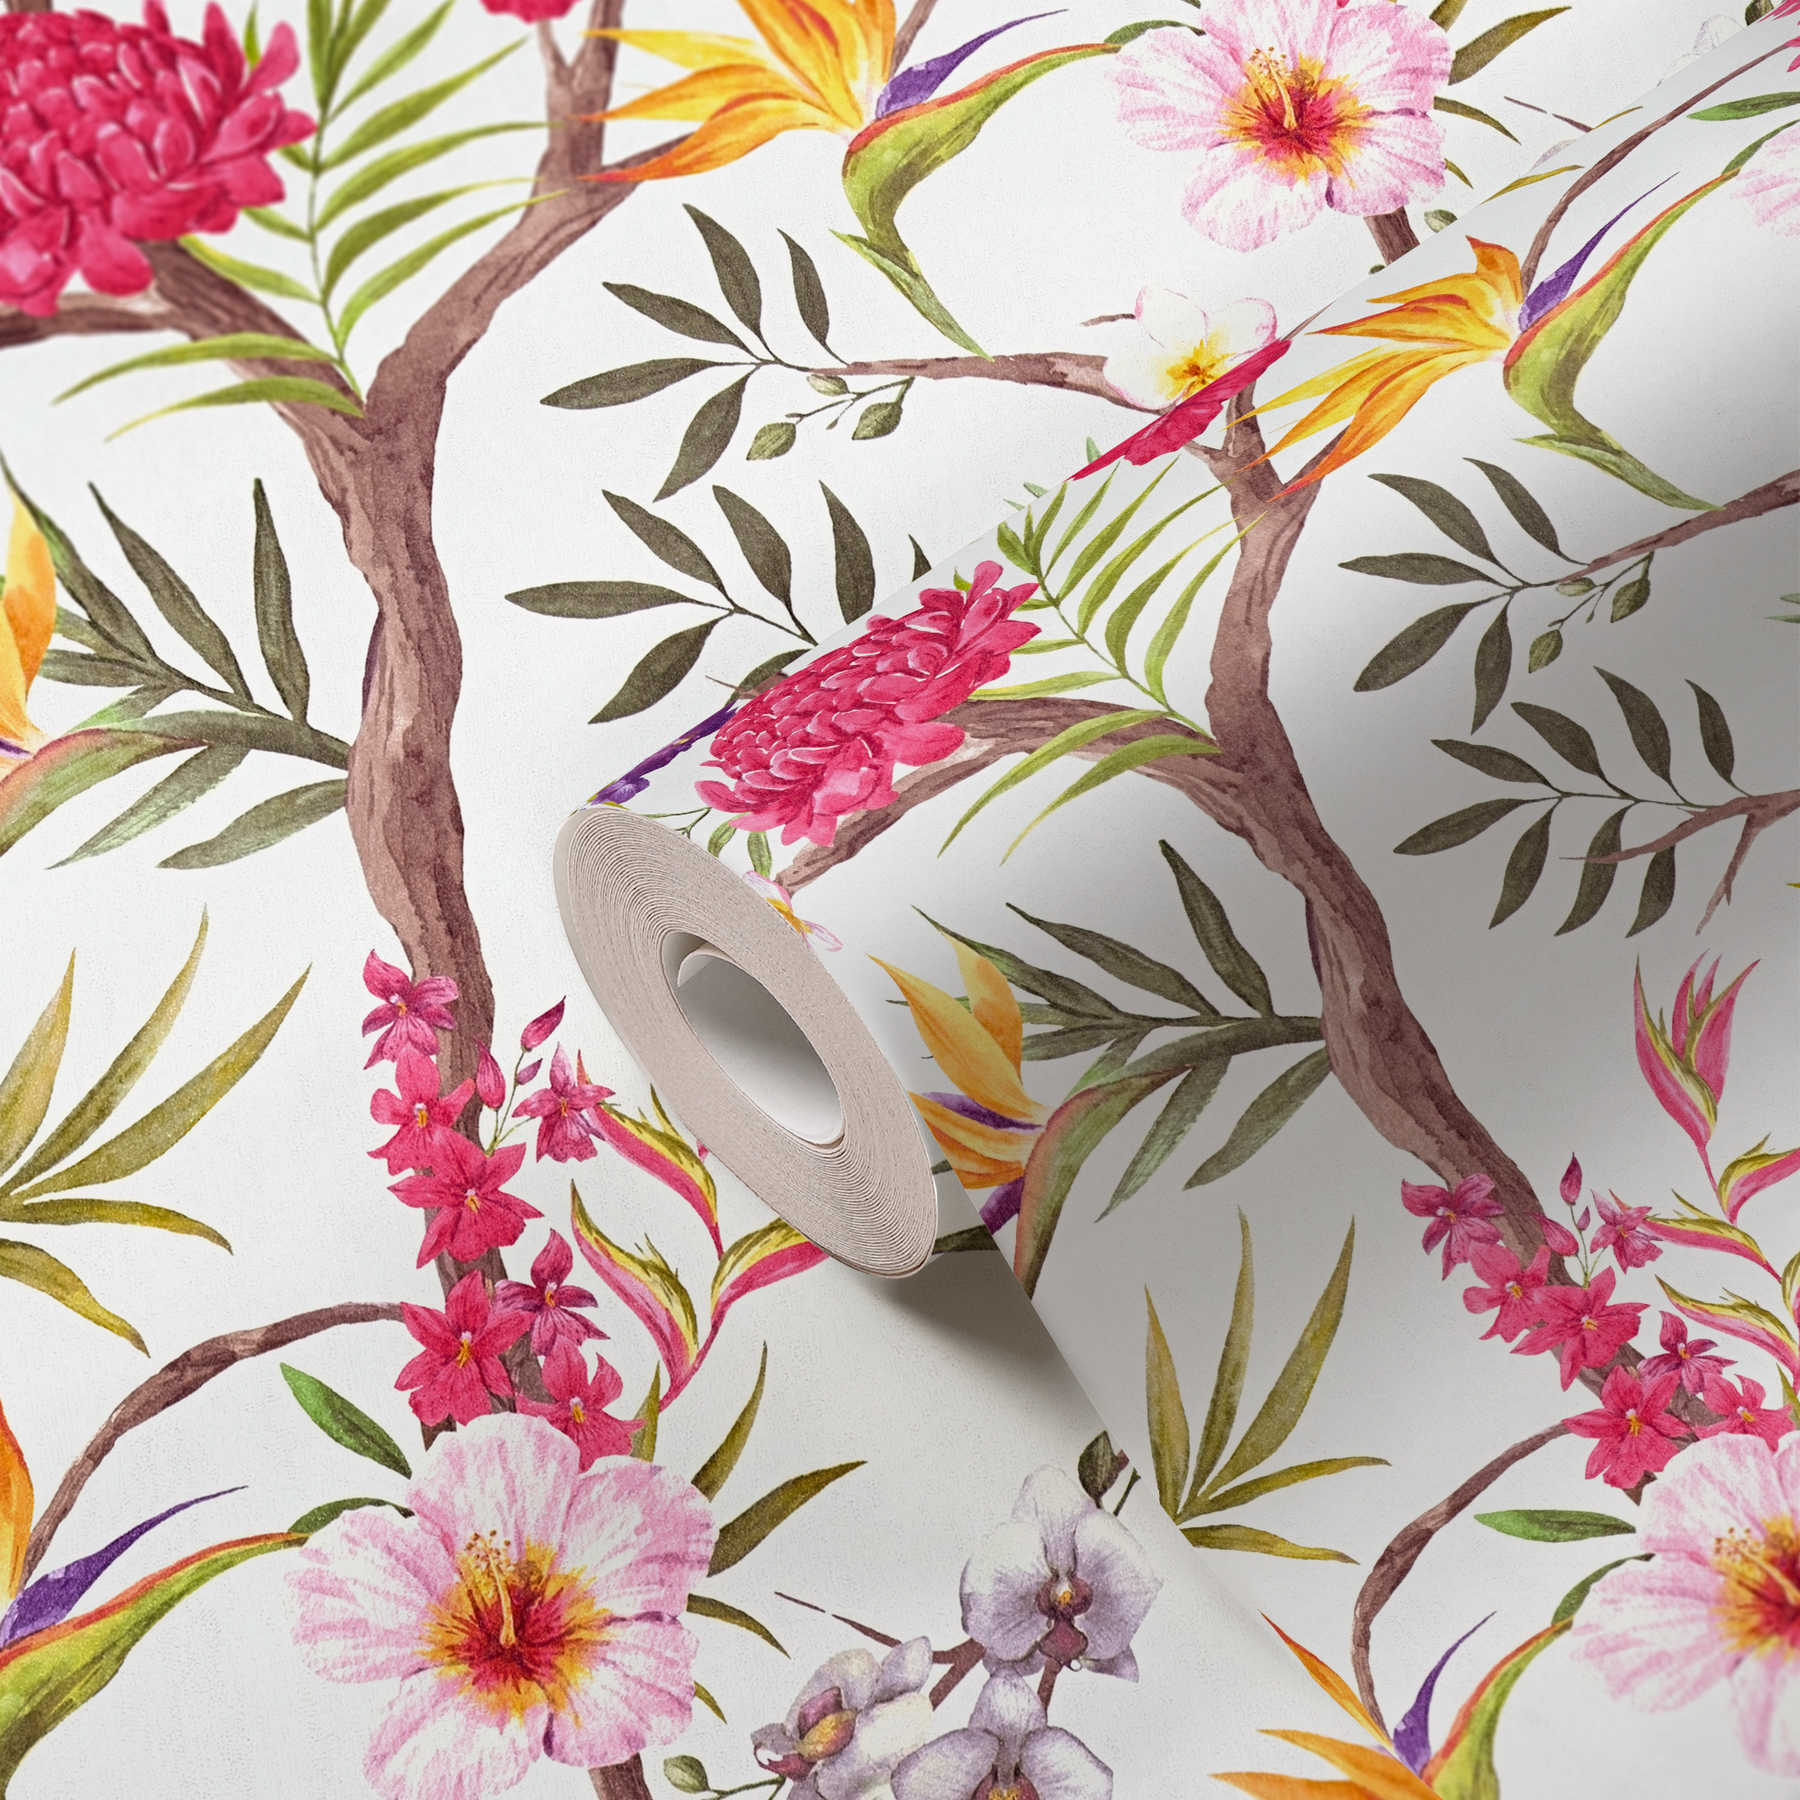             Jungle flowers non-woven wallpaper in vivid colours - colourful, red, yellow, brown, green
        